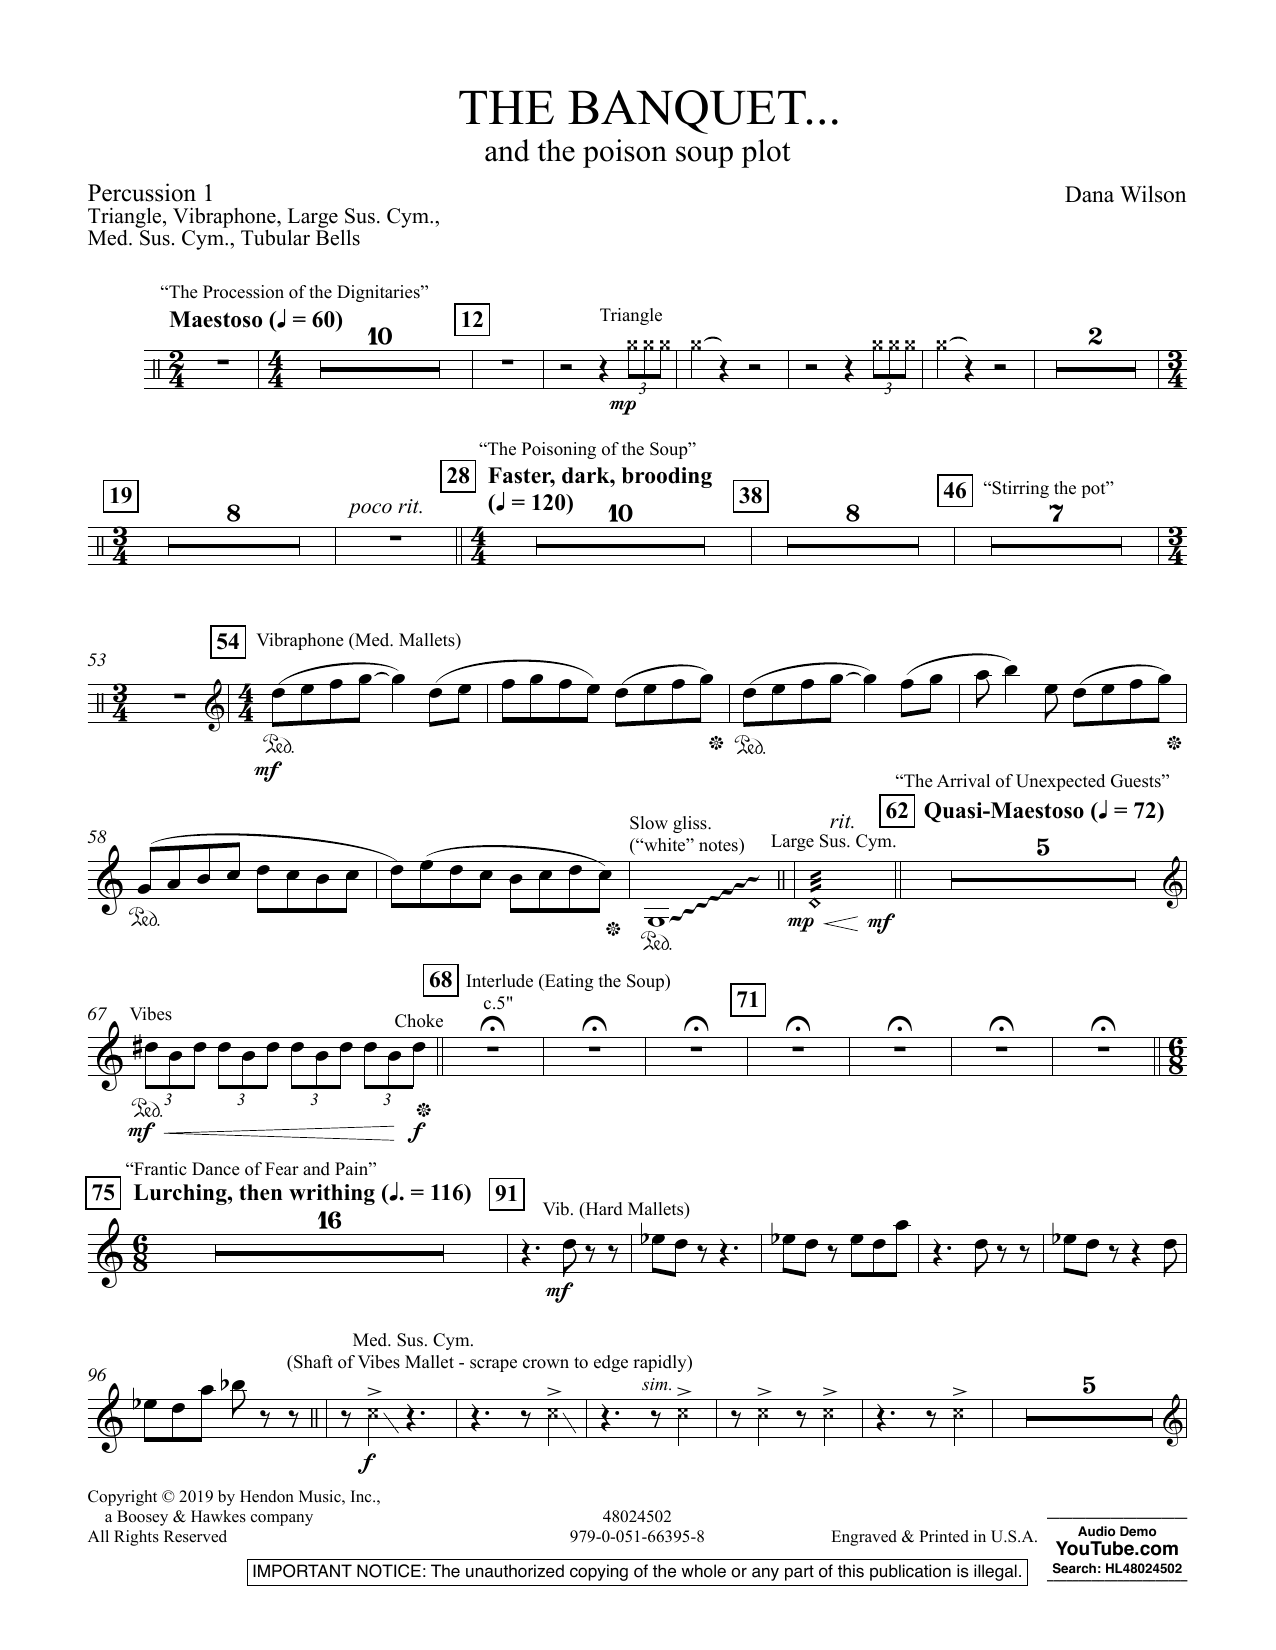 Dana Wilson The Banquet...and the poison soup plot - Percussion 1 sheet music preview music notes and score for Concert Band including 2 page(s)